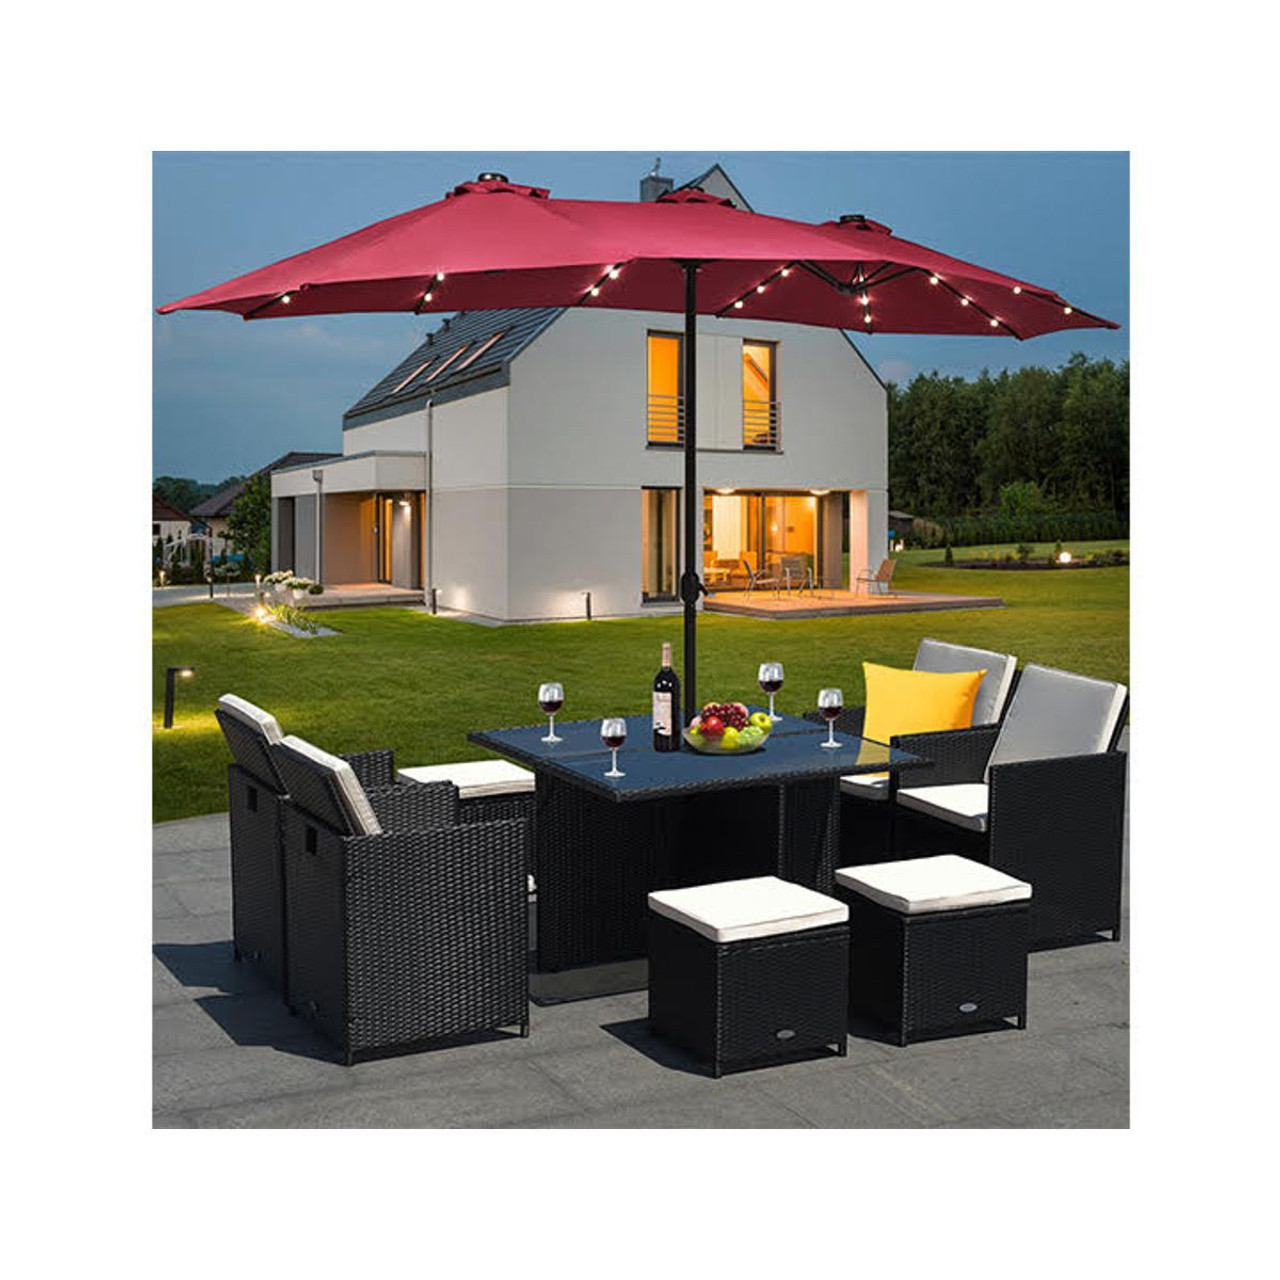 15-Foot Solar LED Double Patio Umbrella with Crank product image